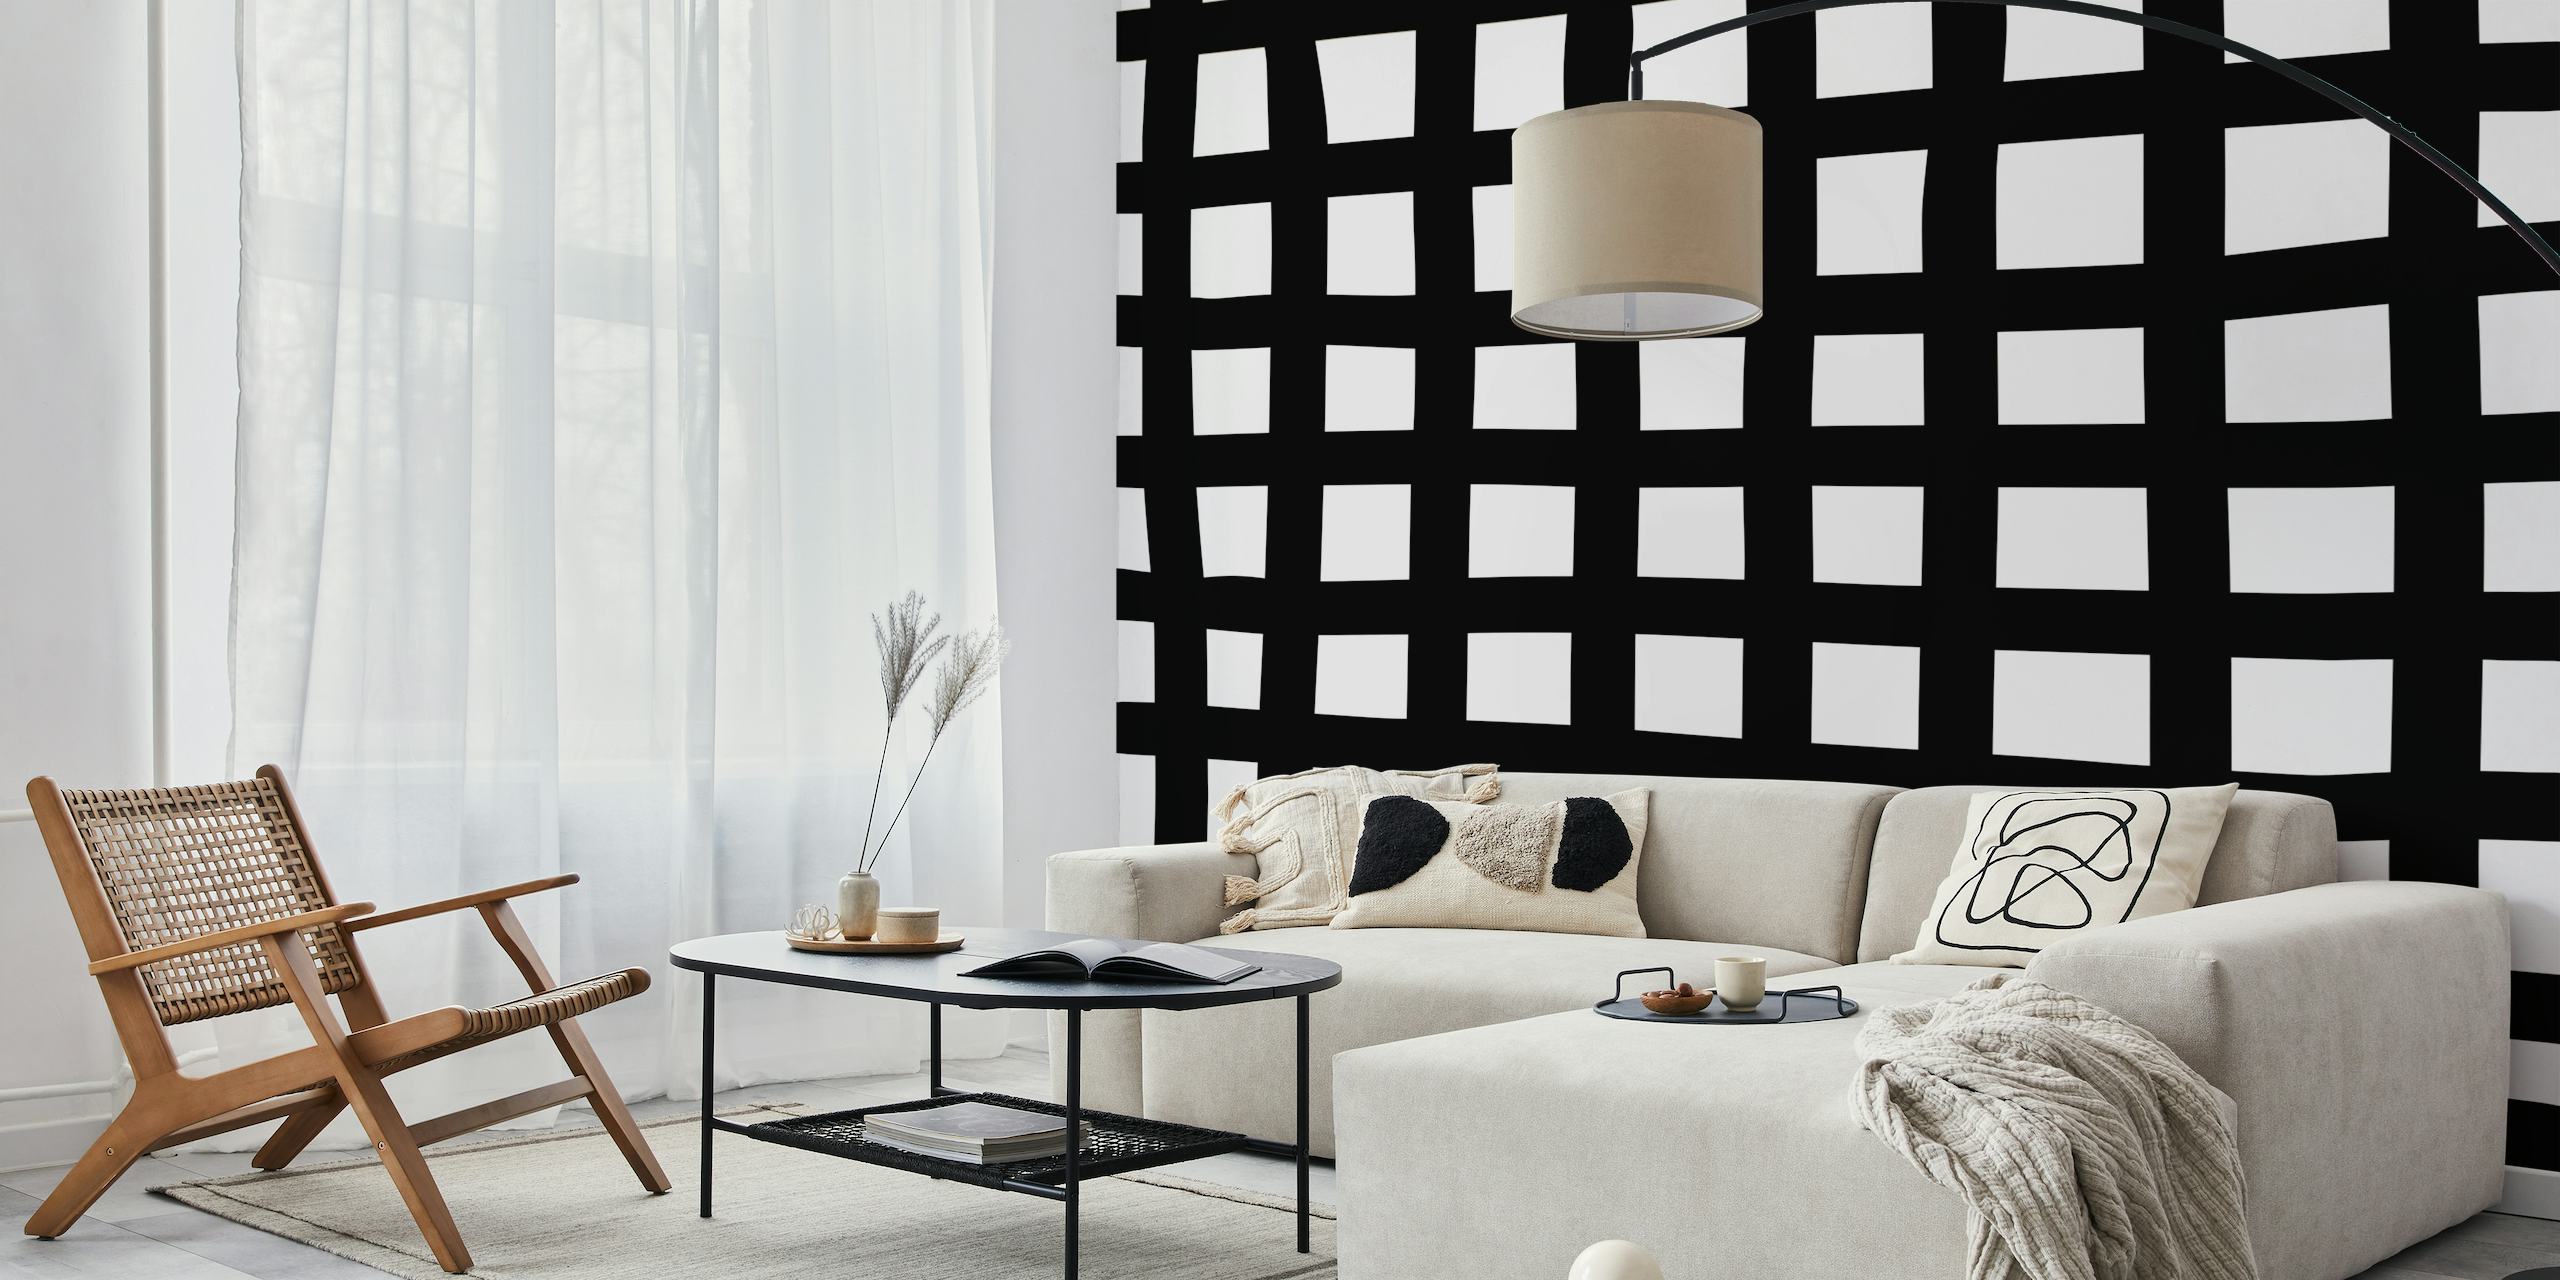 Wonky black and white checkered pattern wall mural